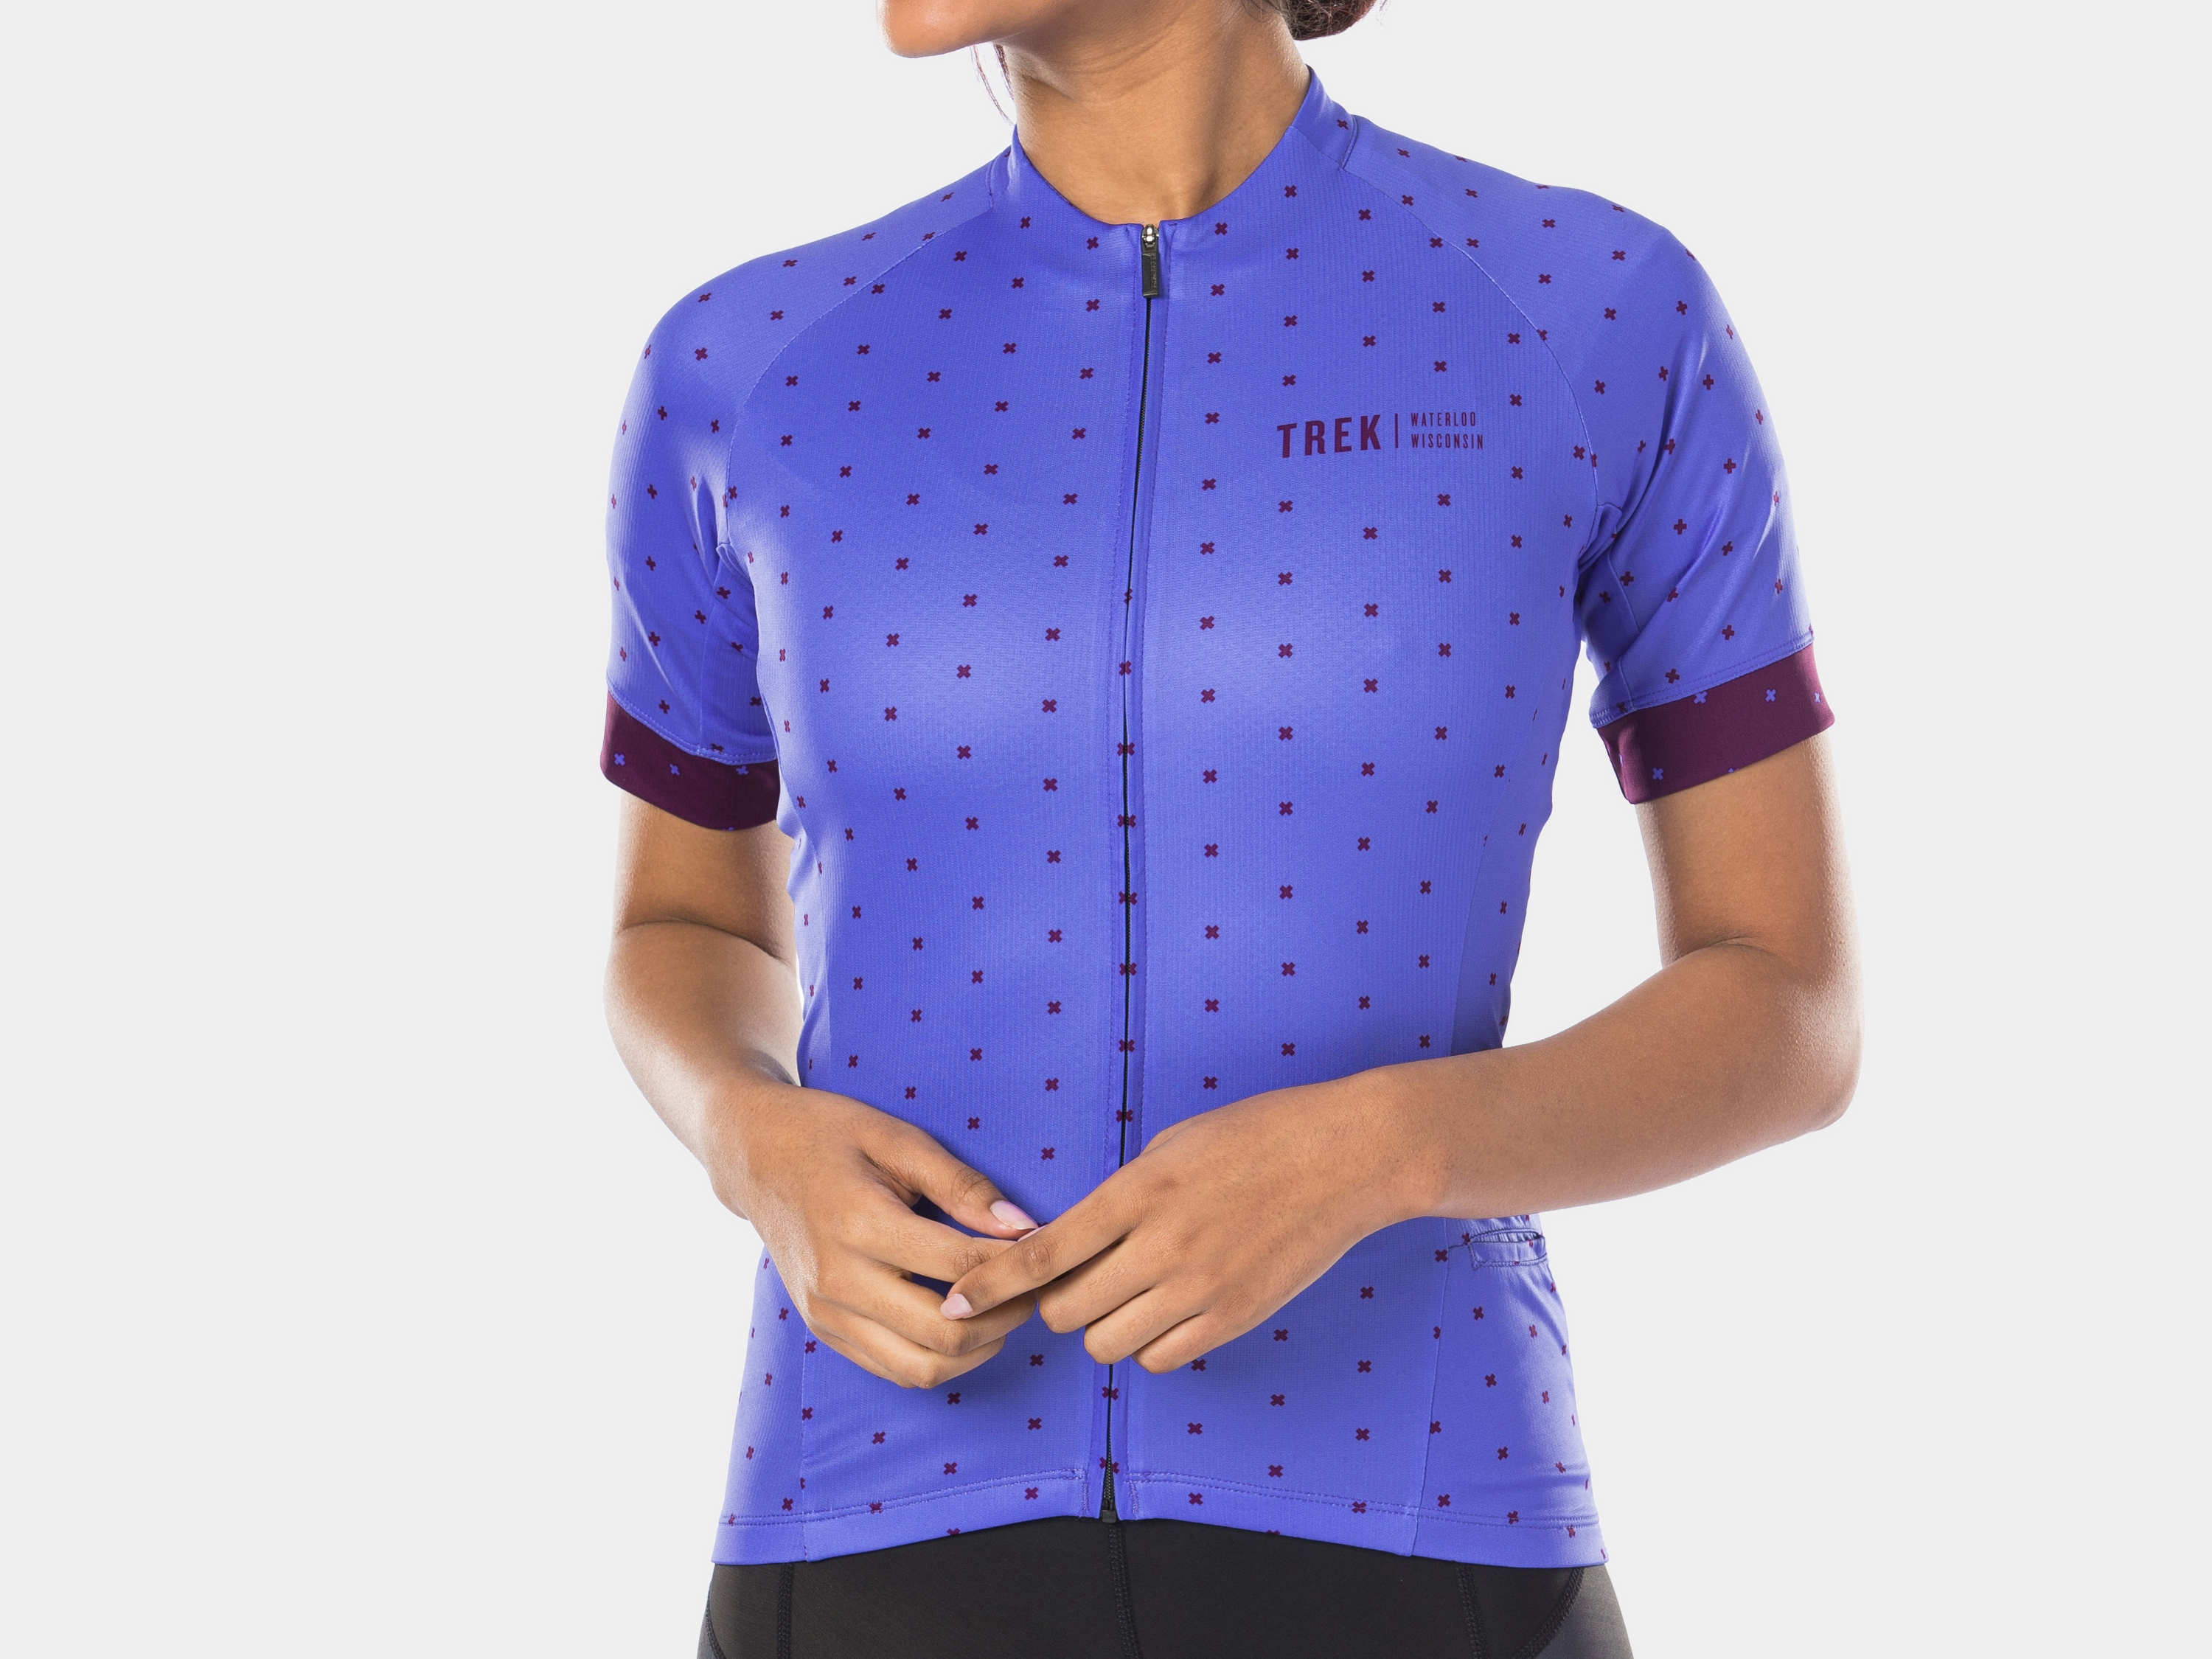 ladies cycling outfits